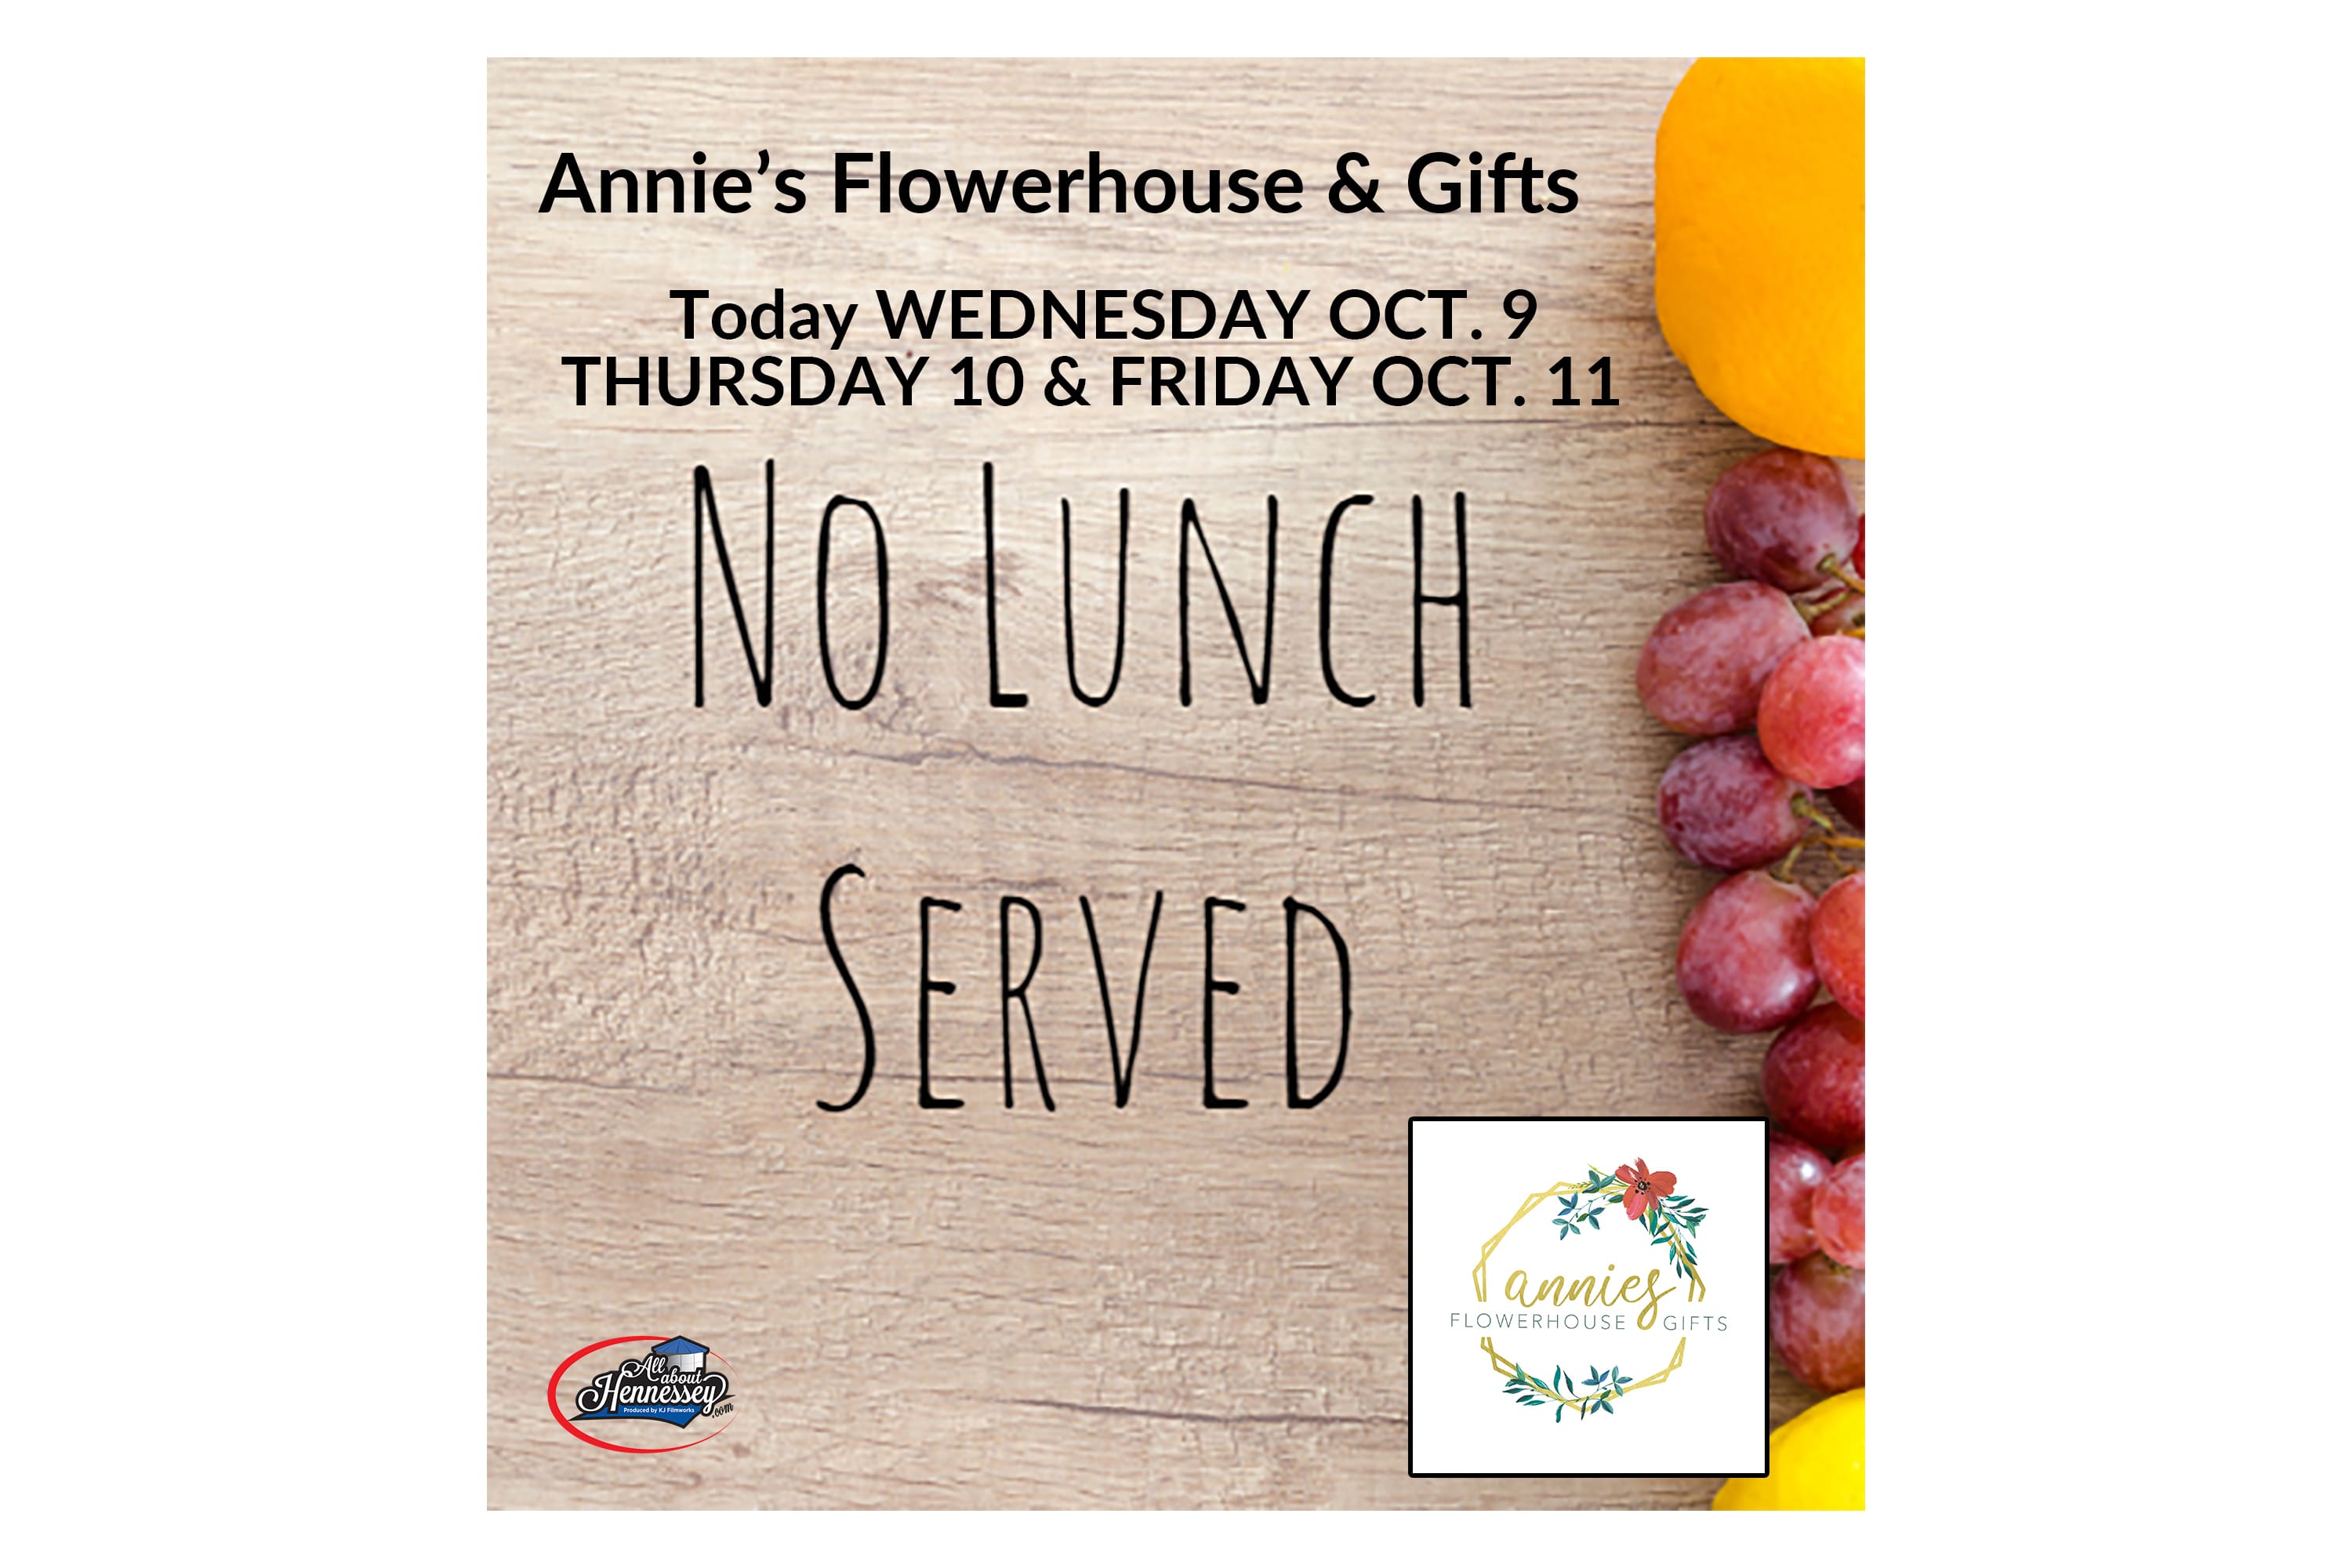 ANNIES NOT SERVING LUNCH